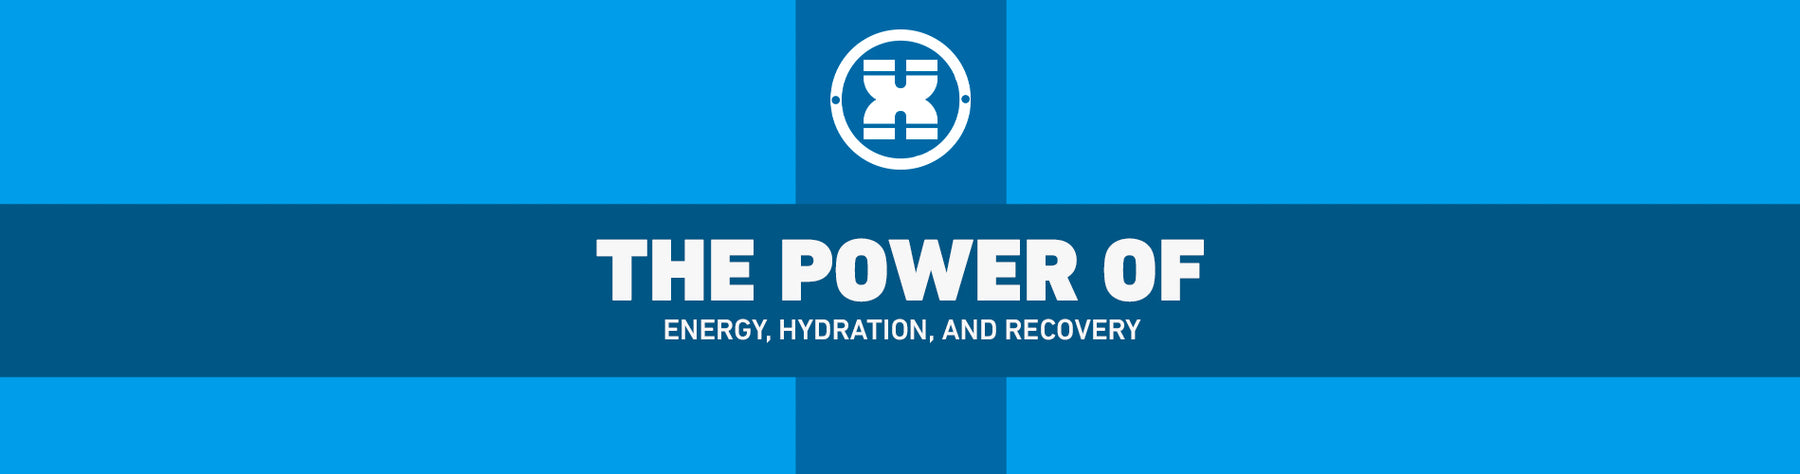 The Power of Energy, Hydration, and Recovery